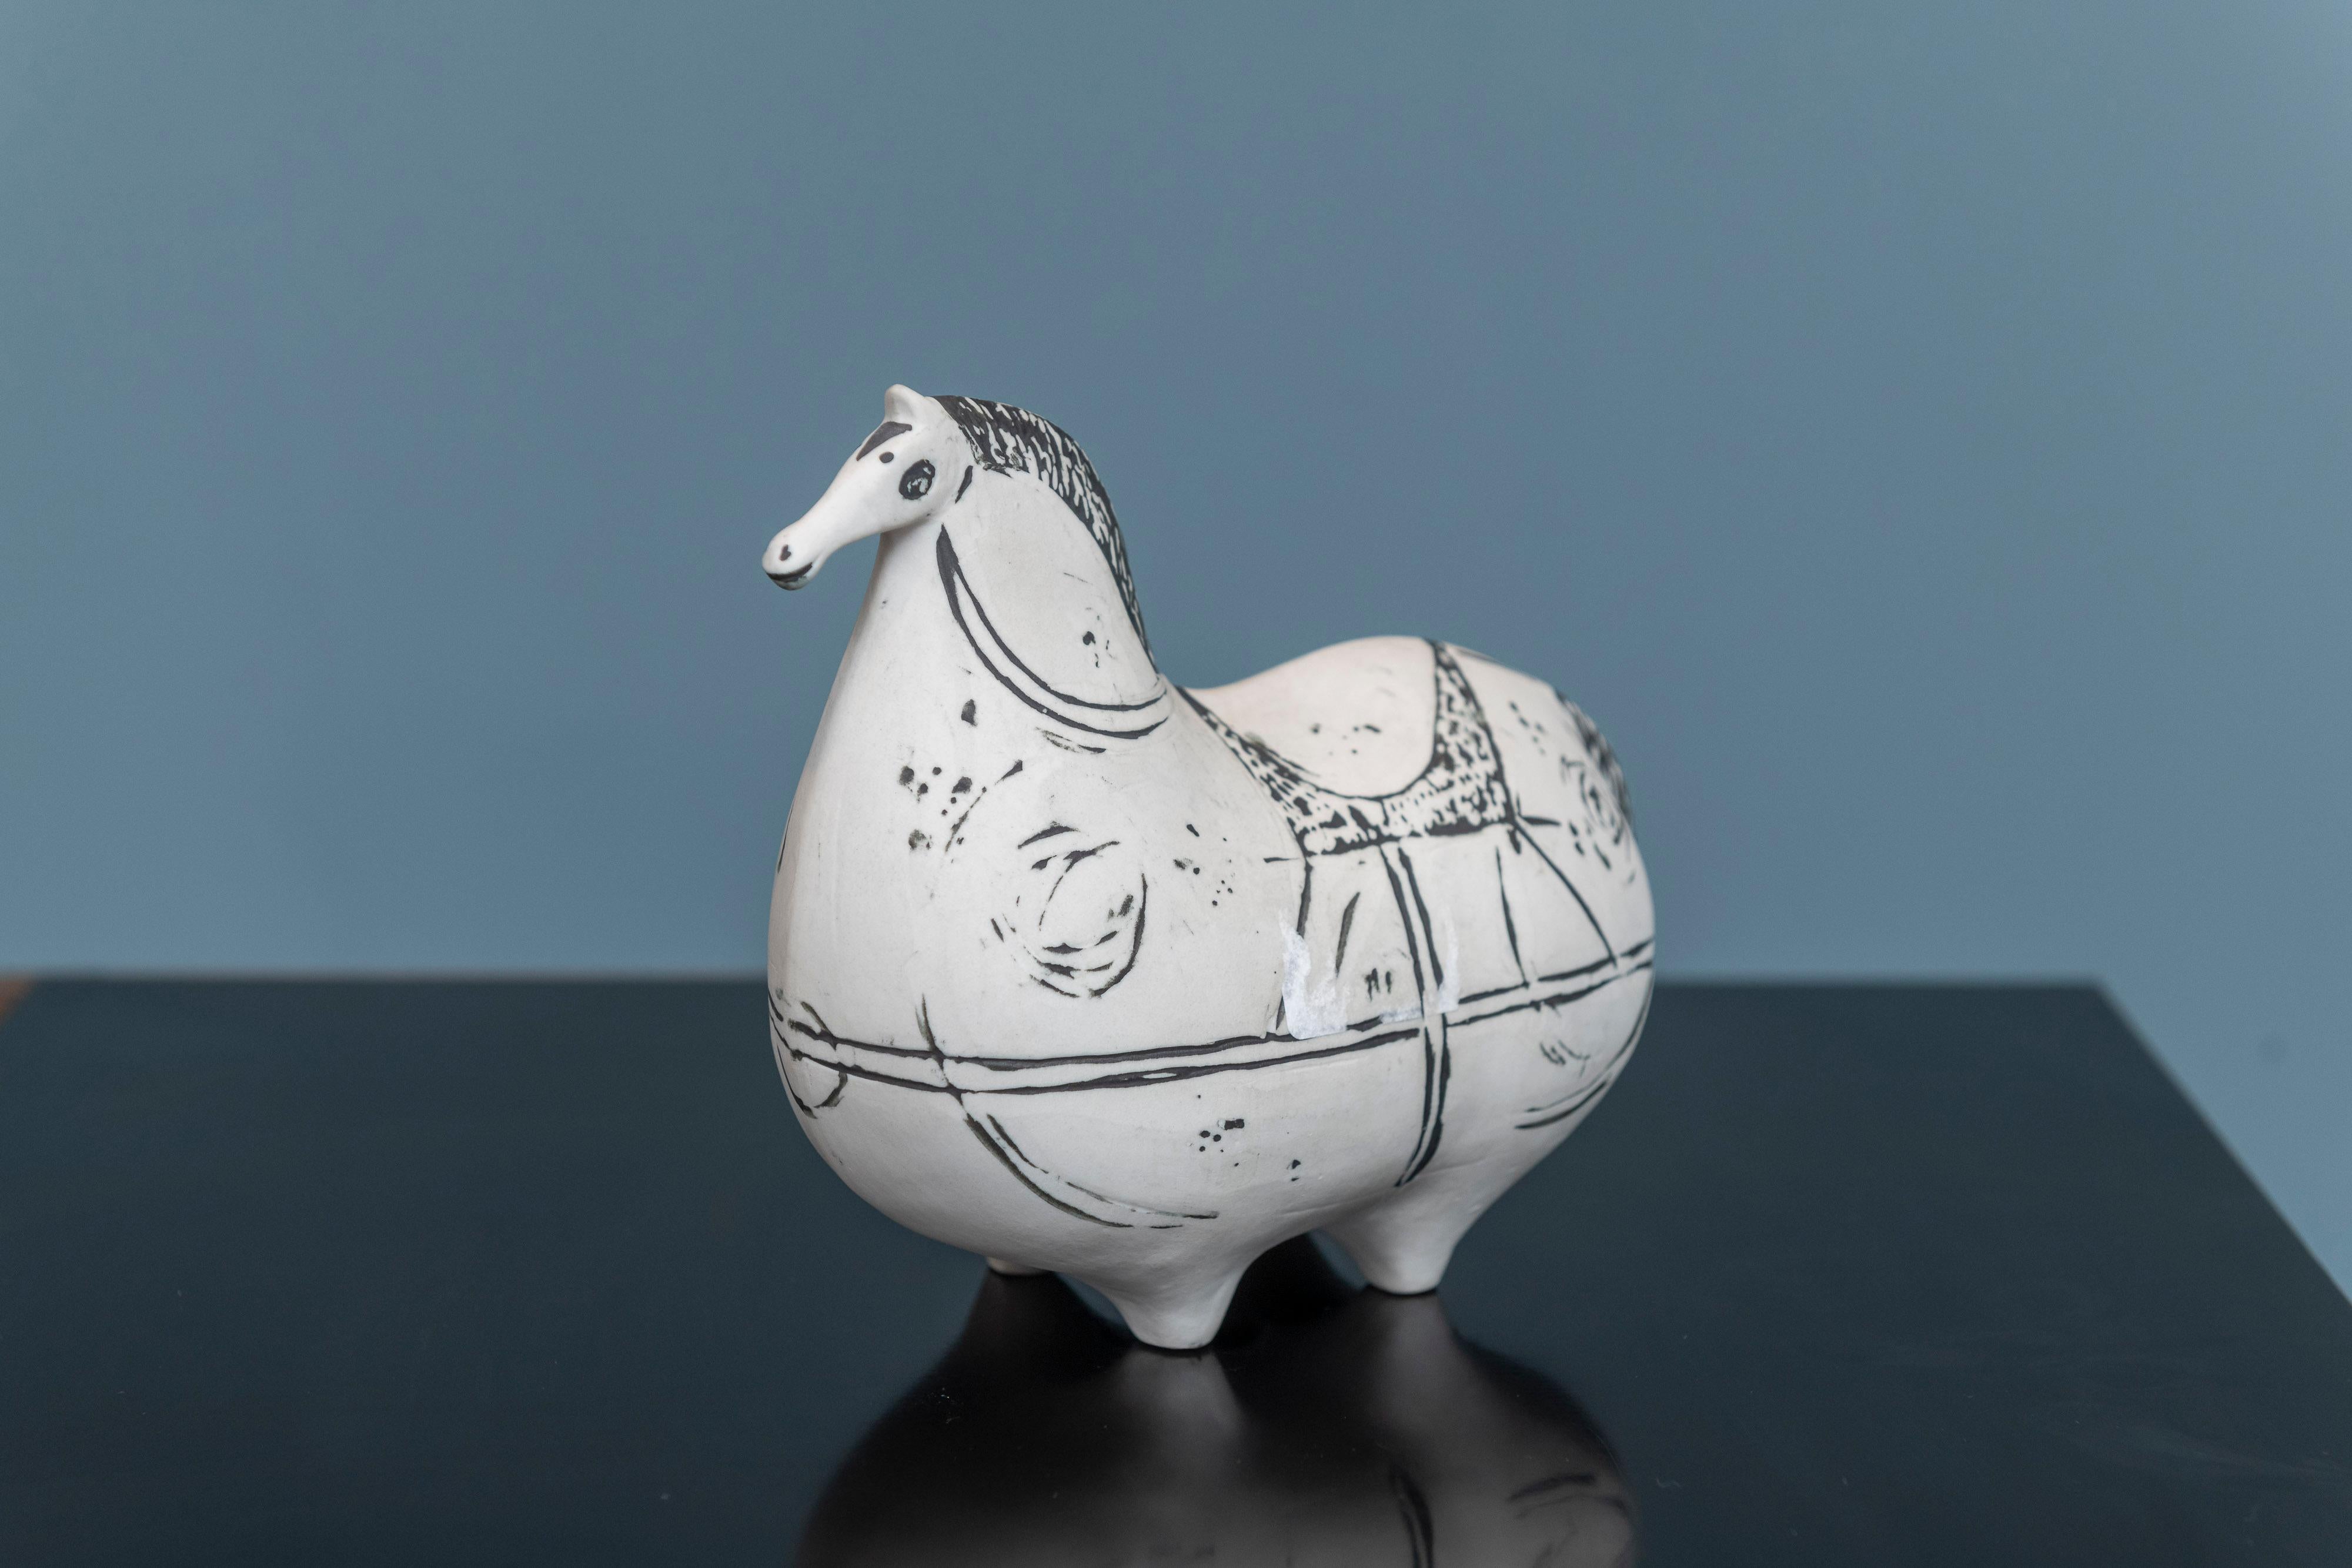 Stig Lindberg design stoneware horse for Gustavberg, Sweden. Elegant looking horse with hand painted decoration, signed and partial label still present. In perfect original condition, ready to enjoy.